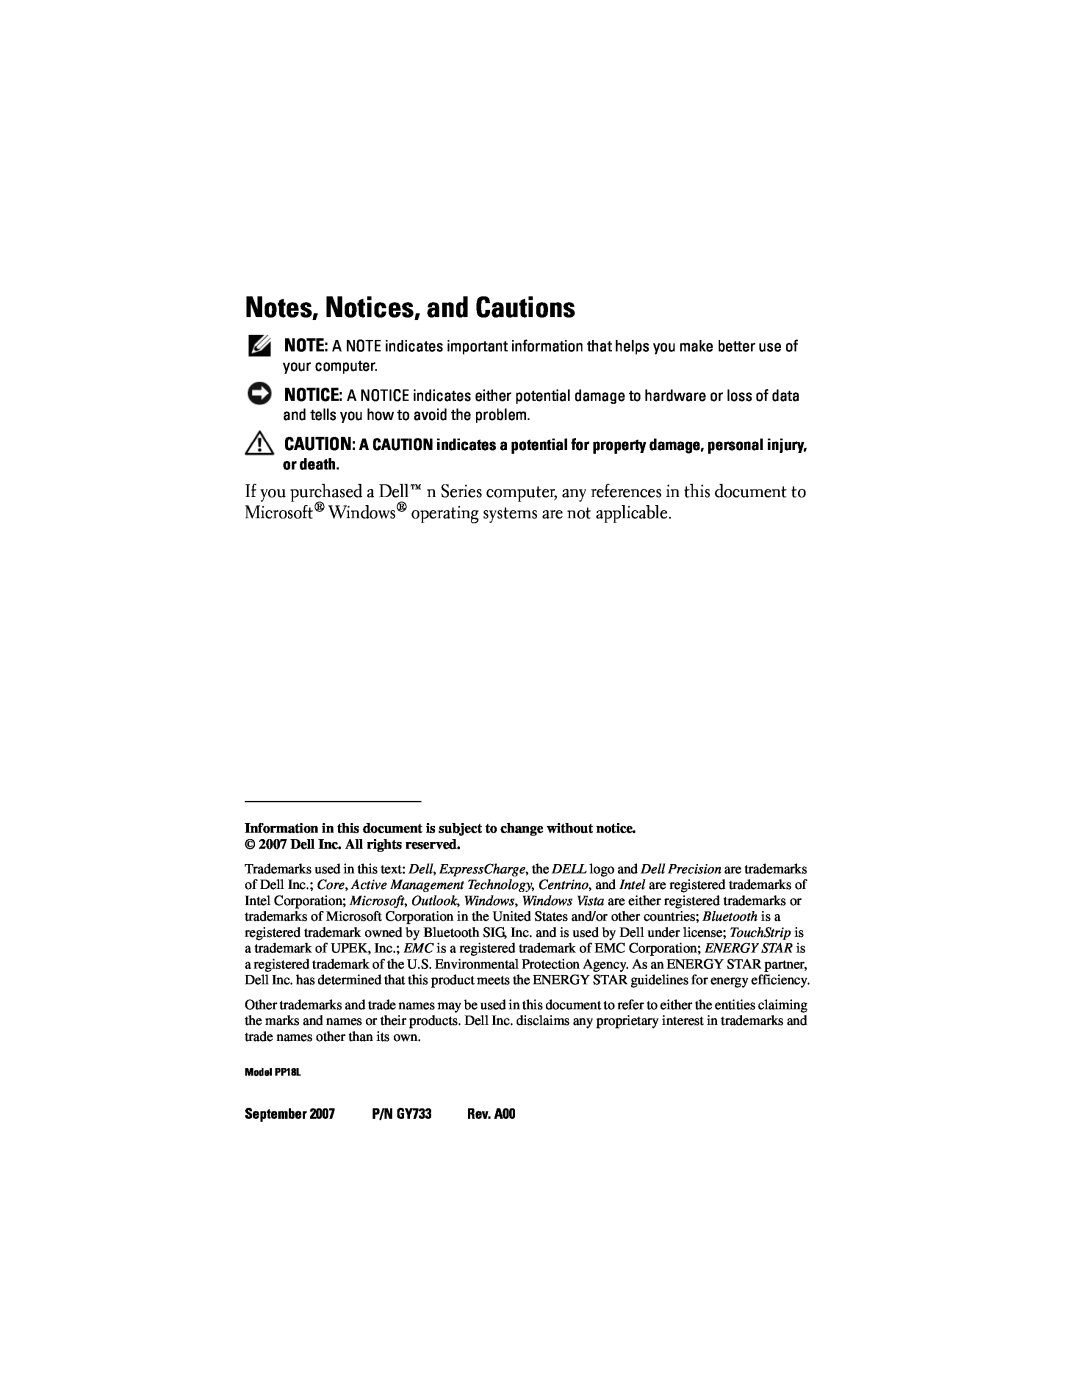 Dell PP18L manual Notes, Notices, and Cautions, September, P/N GY733 